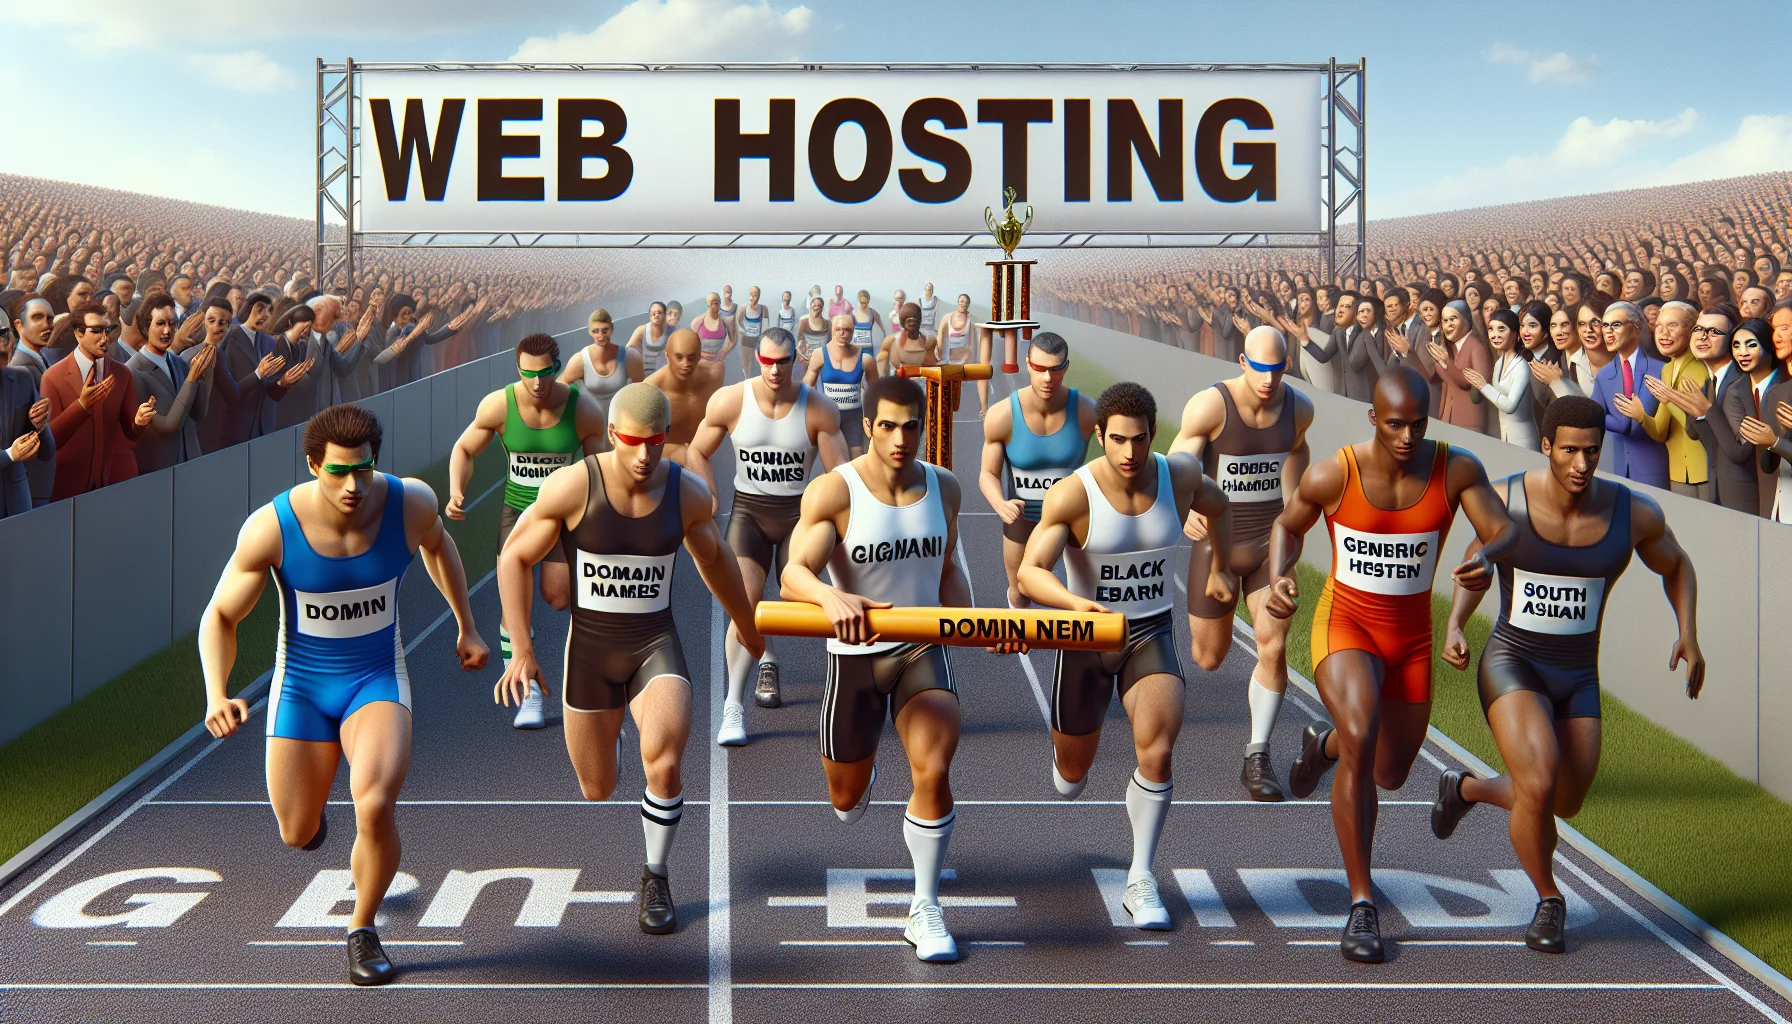 Generate a humorous and realistic image that represents the concept of domain transfer using generic web hosting services. The scene could depict a relay race with batons labeled 'domain names', passed between runners dressed in tech-friendly attire, representing the transfer element. In the background, a large banner displays 'web hosting' and a crowd of diverse individuals of varying ages, genders, and descents such as Caucasian, Black, Middle-Eastern, South Asian, enjoying the race. The enticing part could be a huge trophy awaiting at the end of the race, symbolising the benefits of web hosting. Add subtle elements of technology and coding throughout the image to tie in the concept.